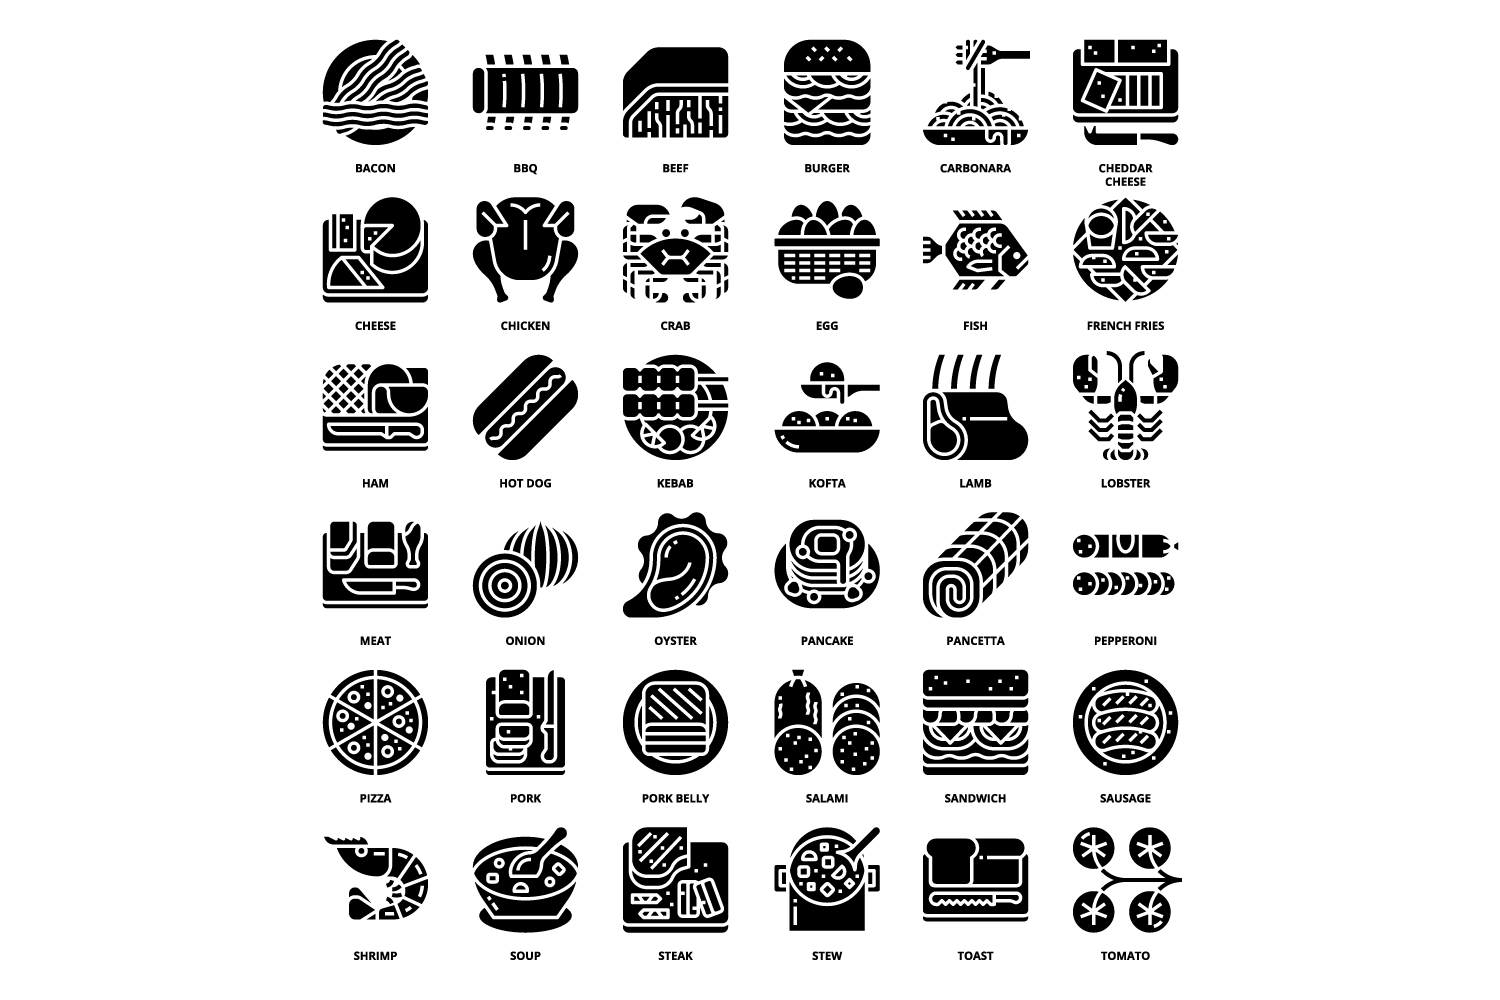 Black and white image of food icons.